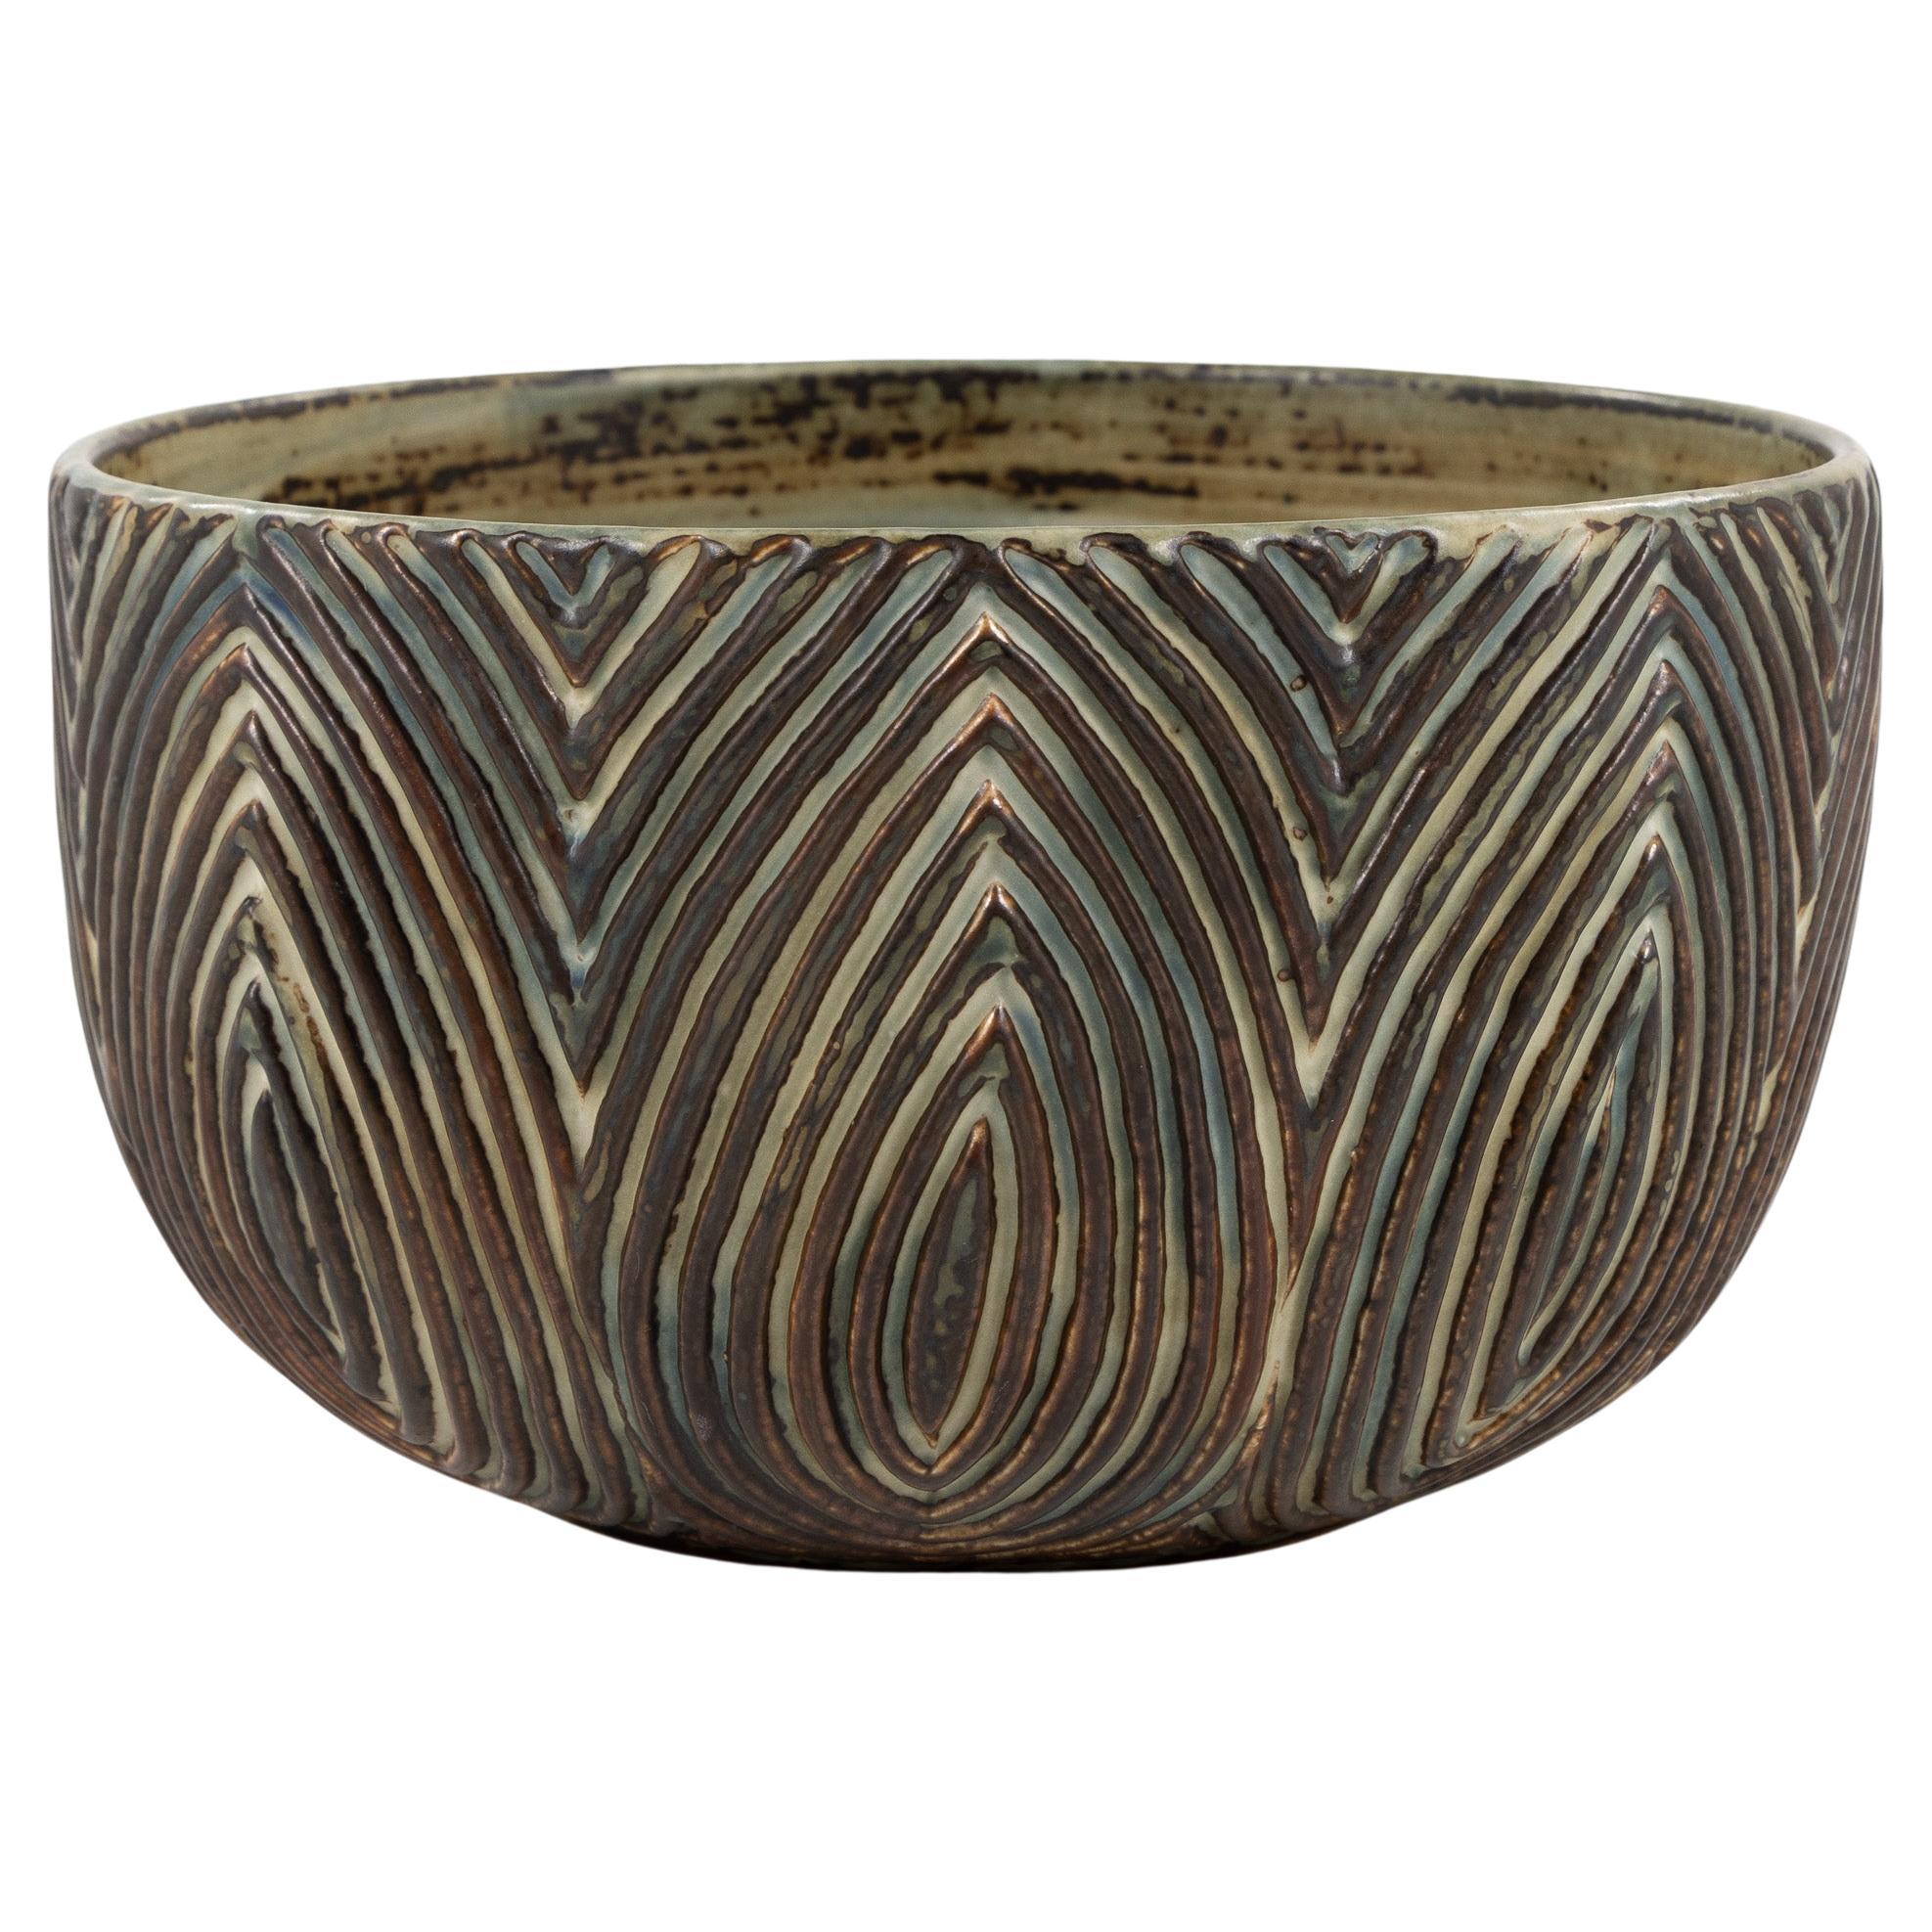 Fluted stoneware bowl by Axel Salto, 1950s